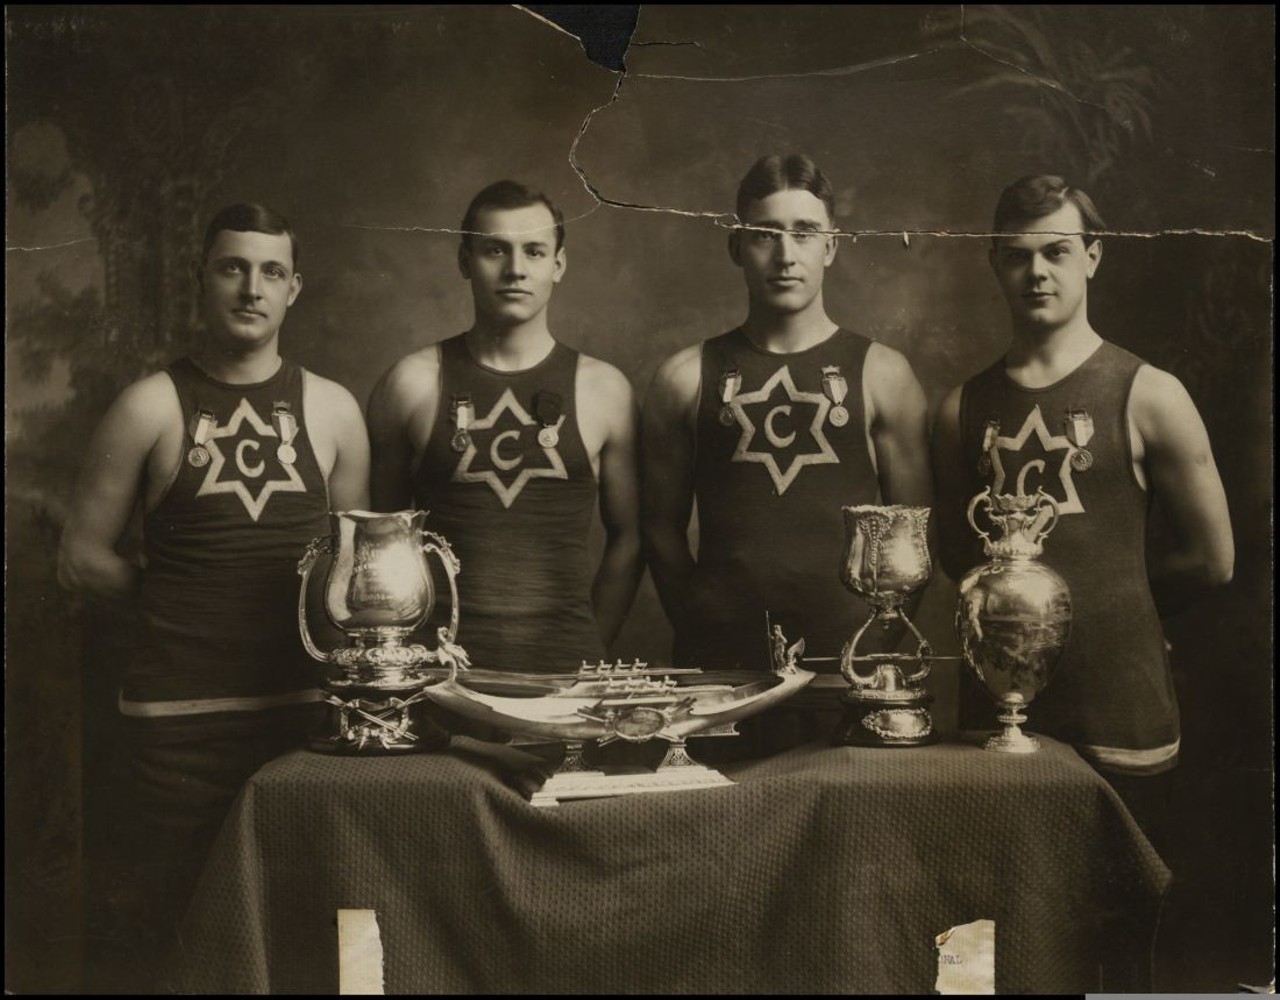 St. Louis was the first Olympics to have medals.
The "gold, silver, bronze" medal format was introduced in 1904. Before the medals, trophies were given out. This photo shows the four-oared race winning team.